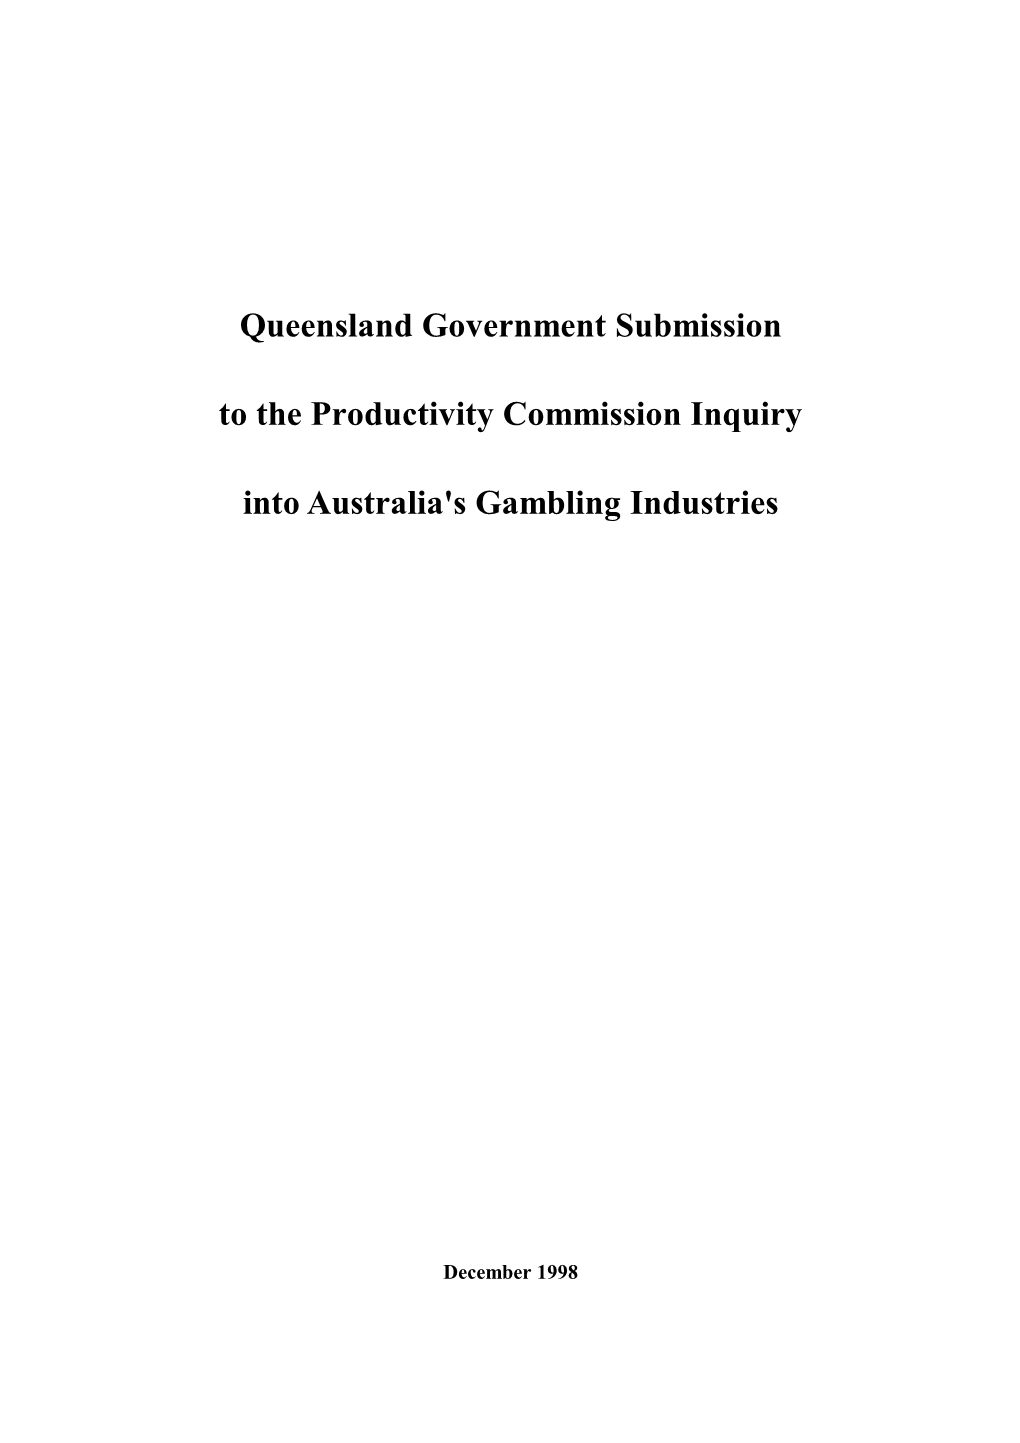 Queensland Government Submission to the Productivity Commission Inquiry Into Australia's Gambling Industries